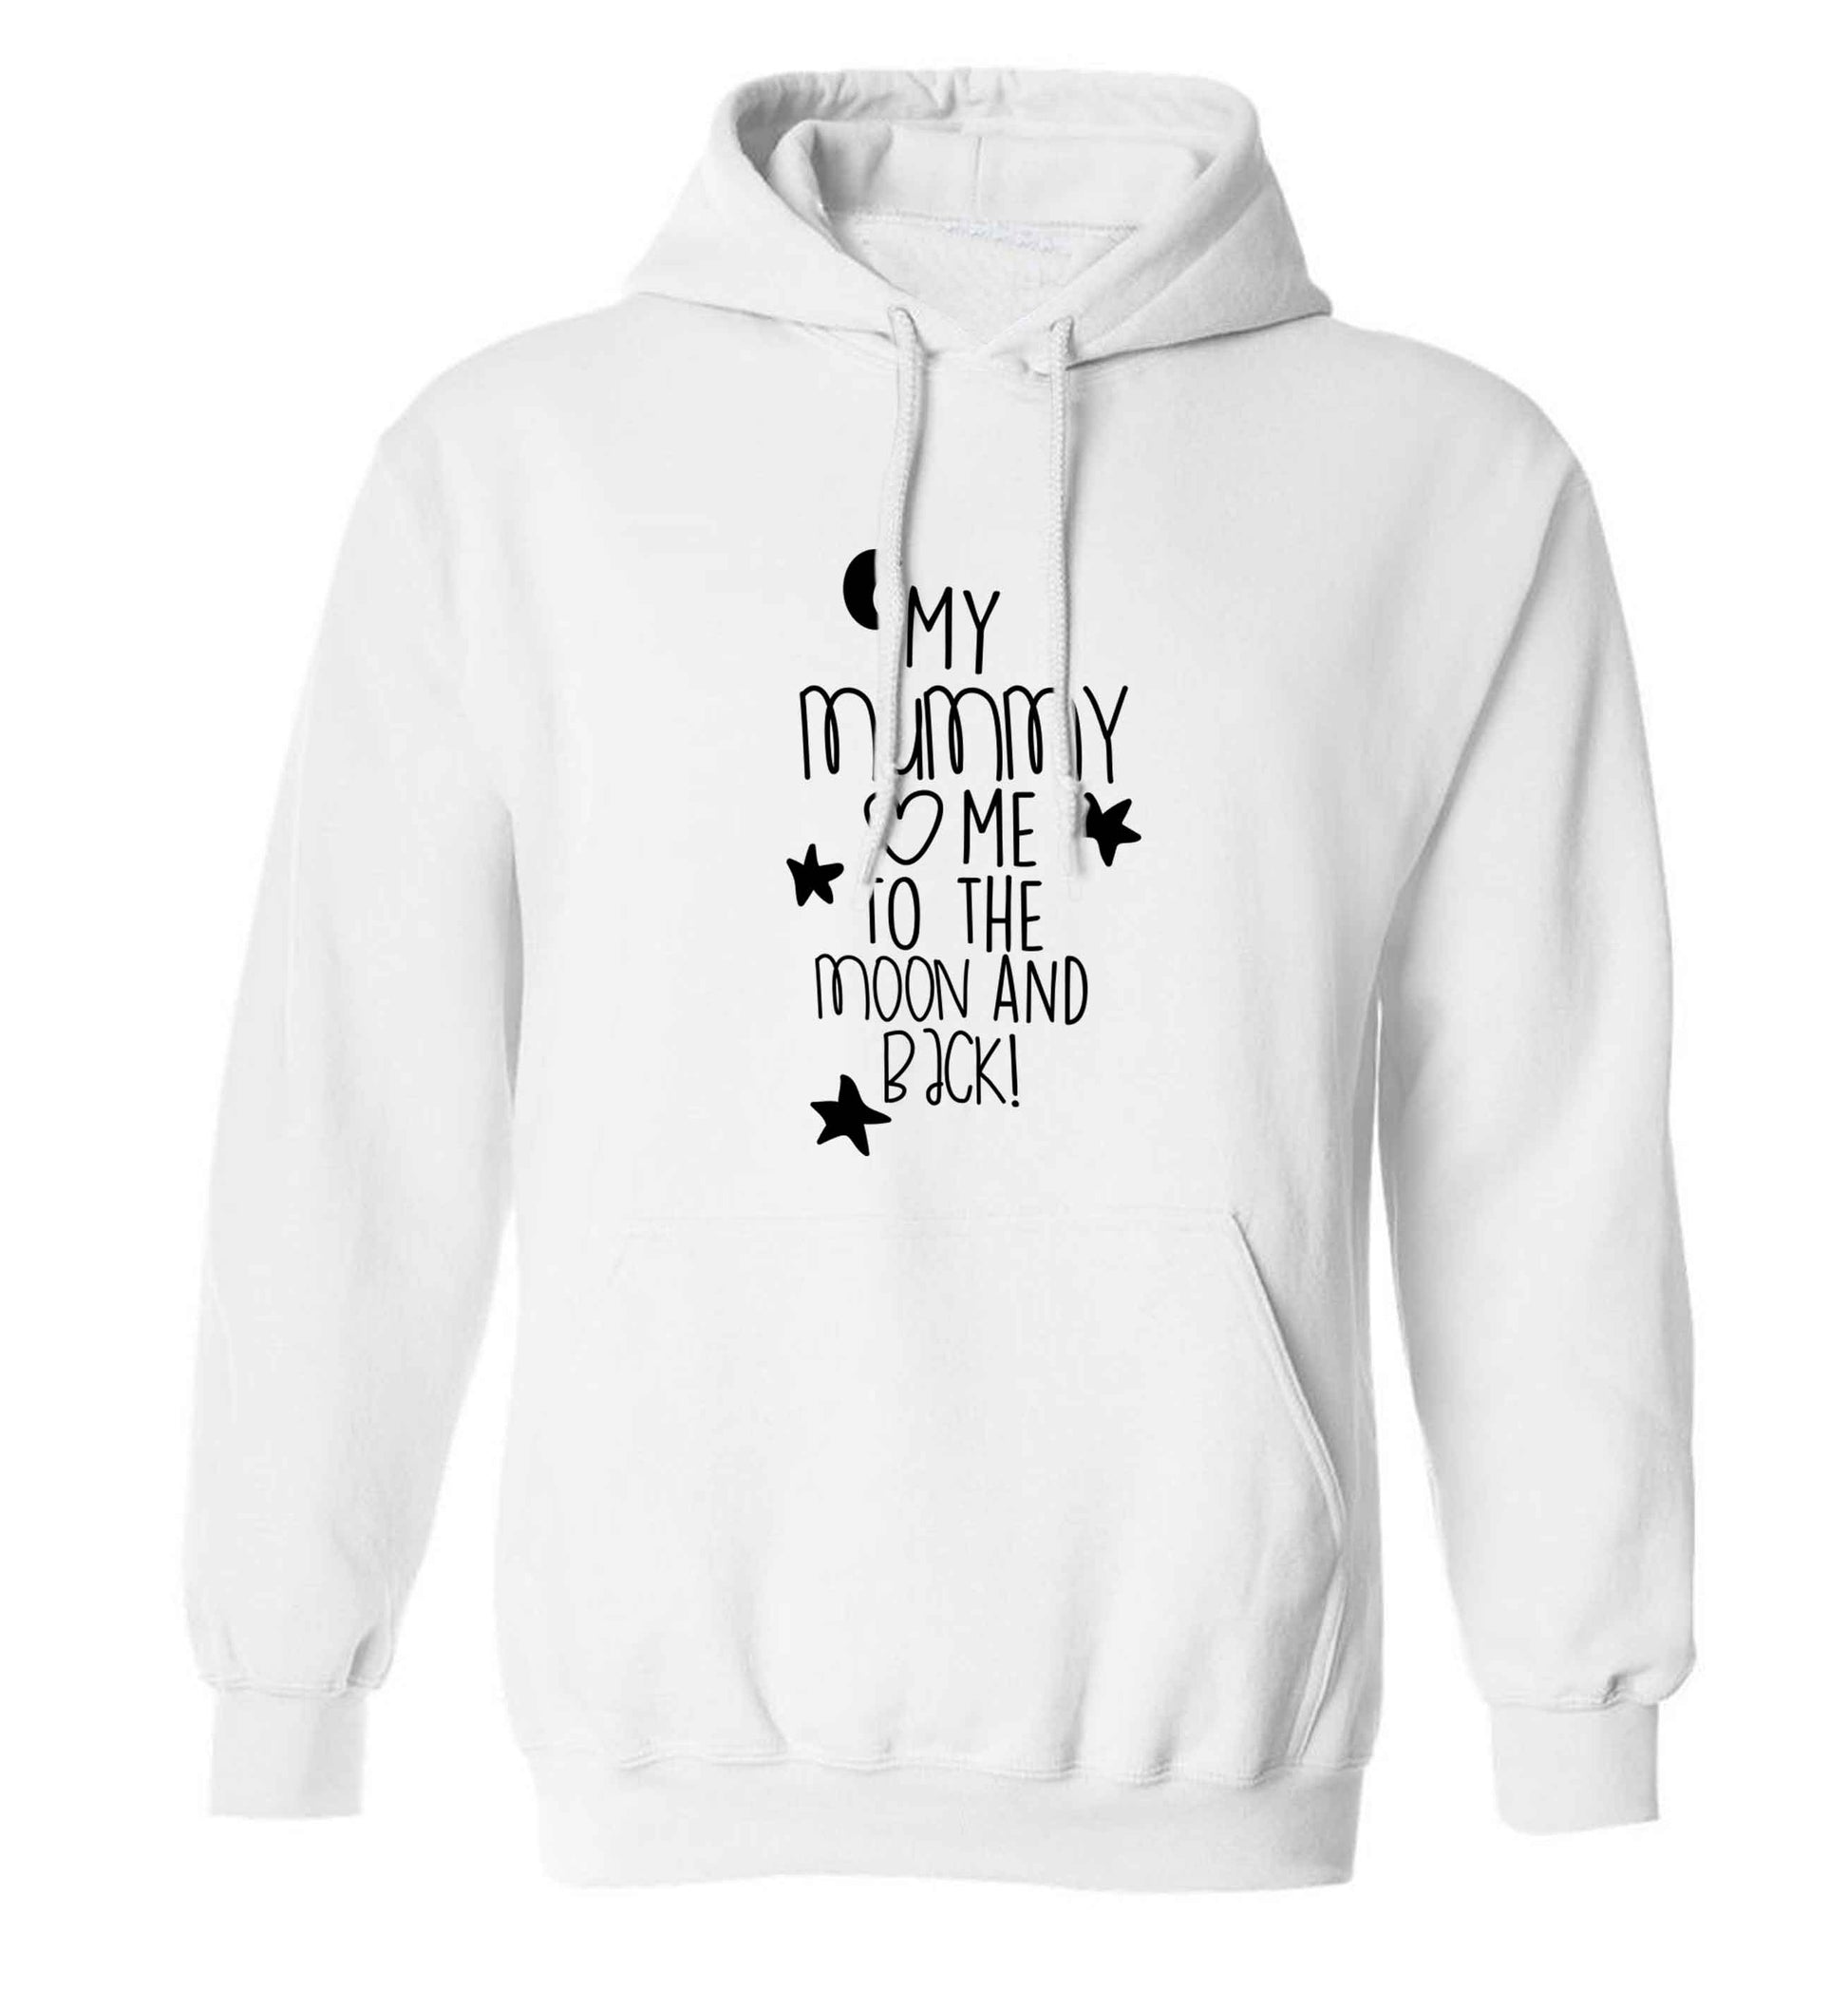 My mum loves me to the moon and back adults unisex white hoodie 2XL